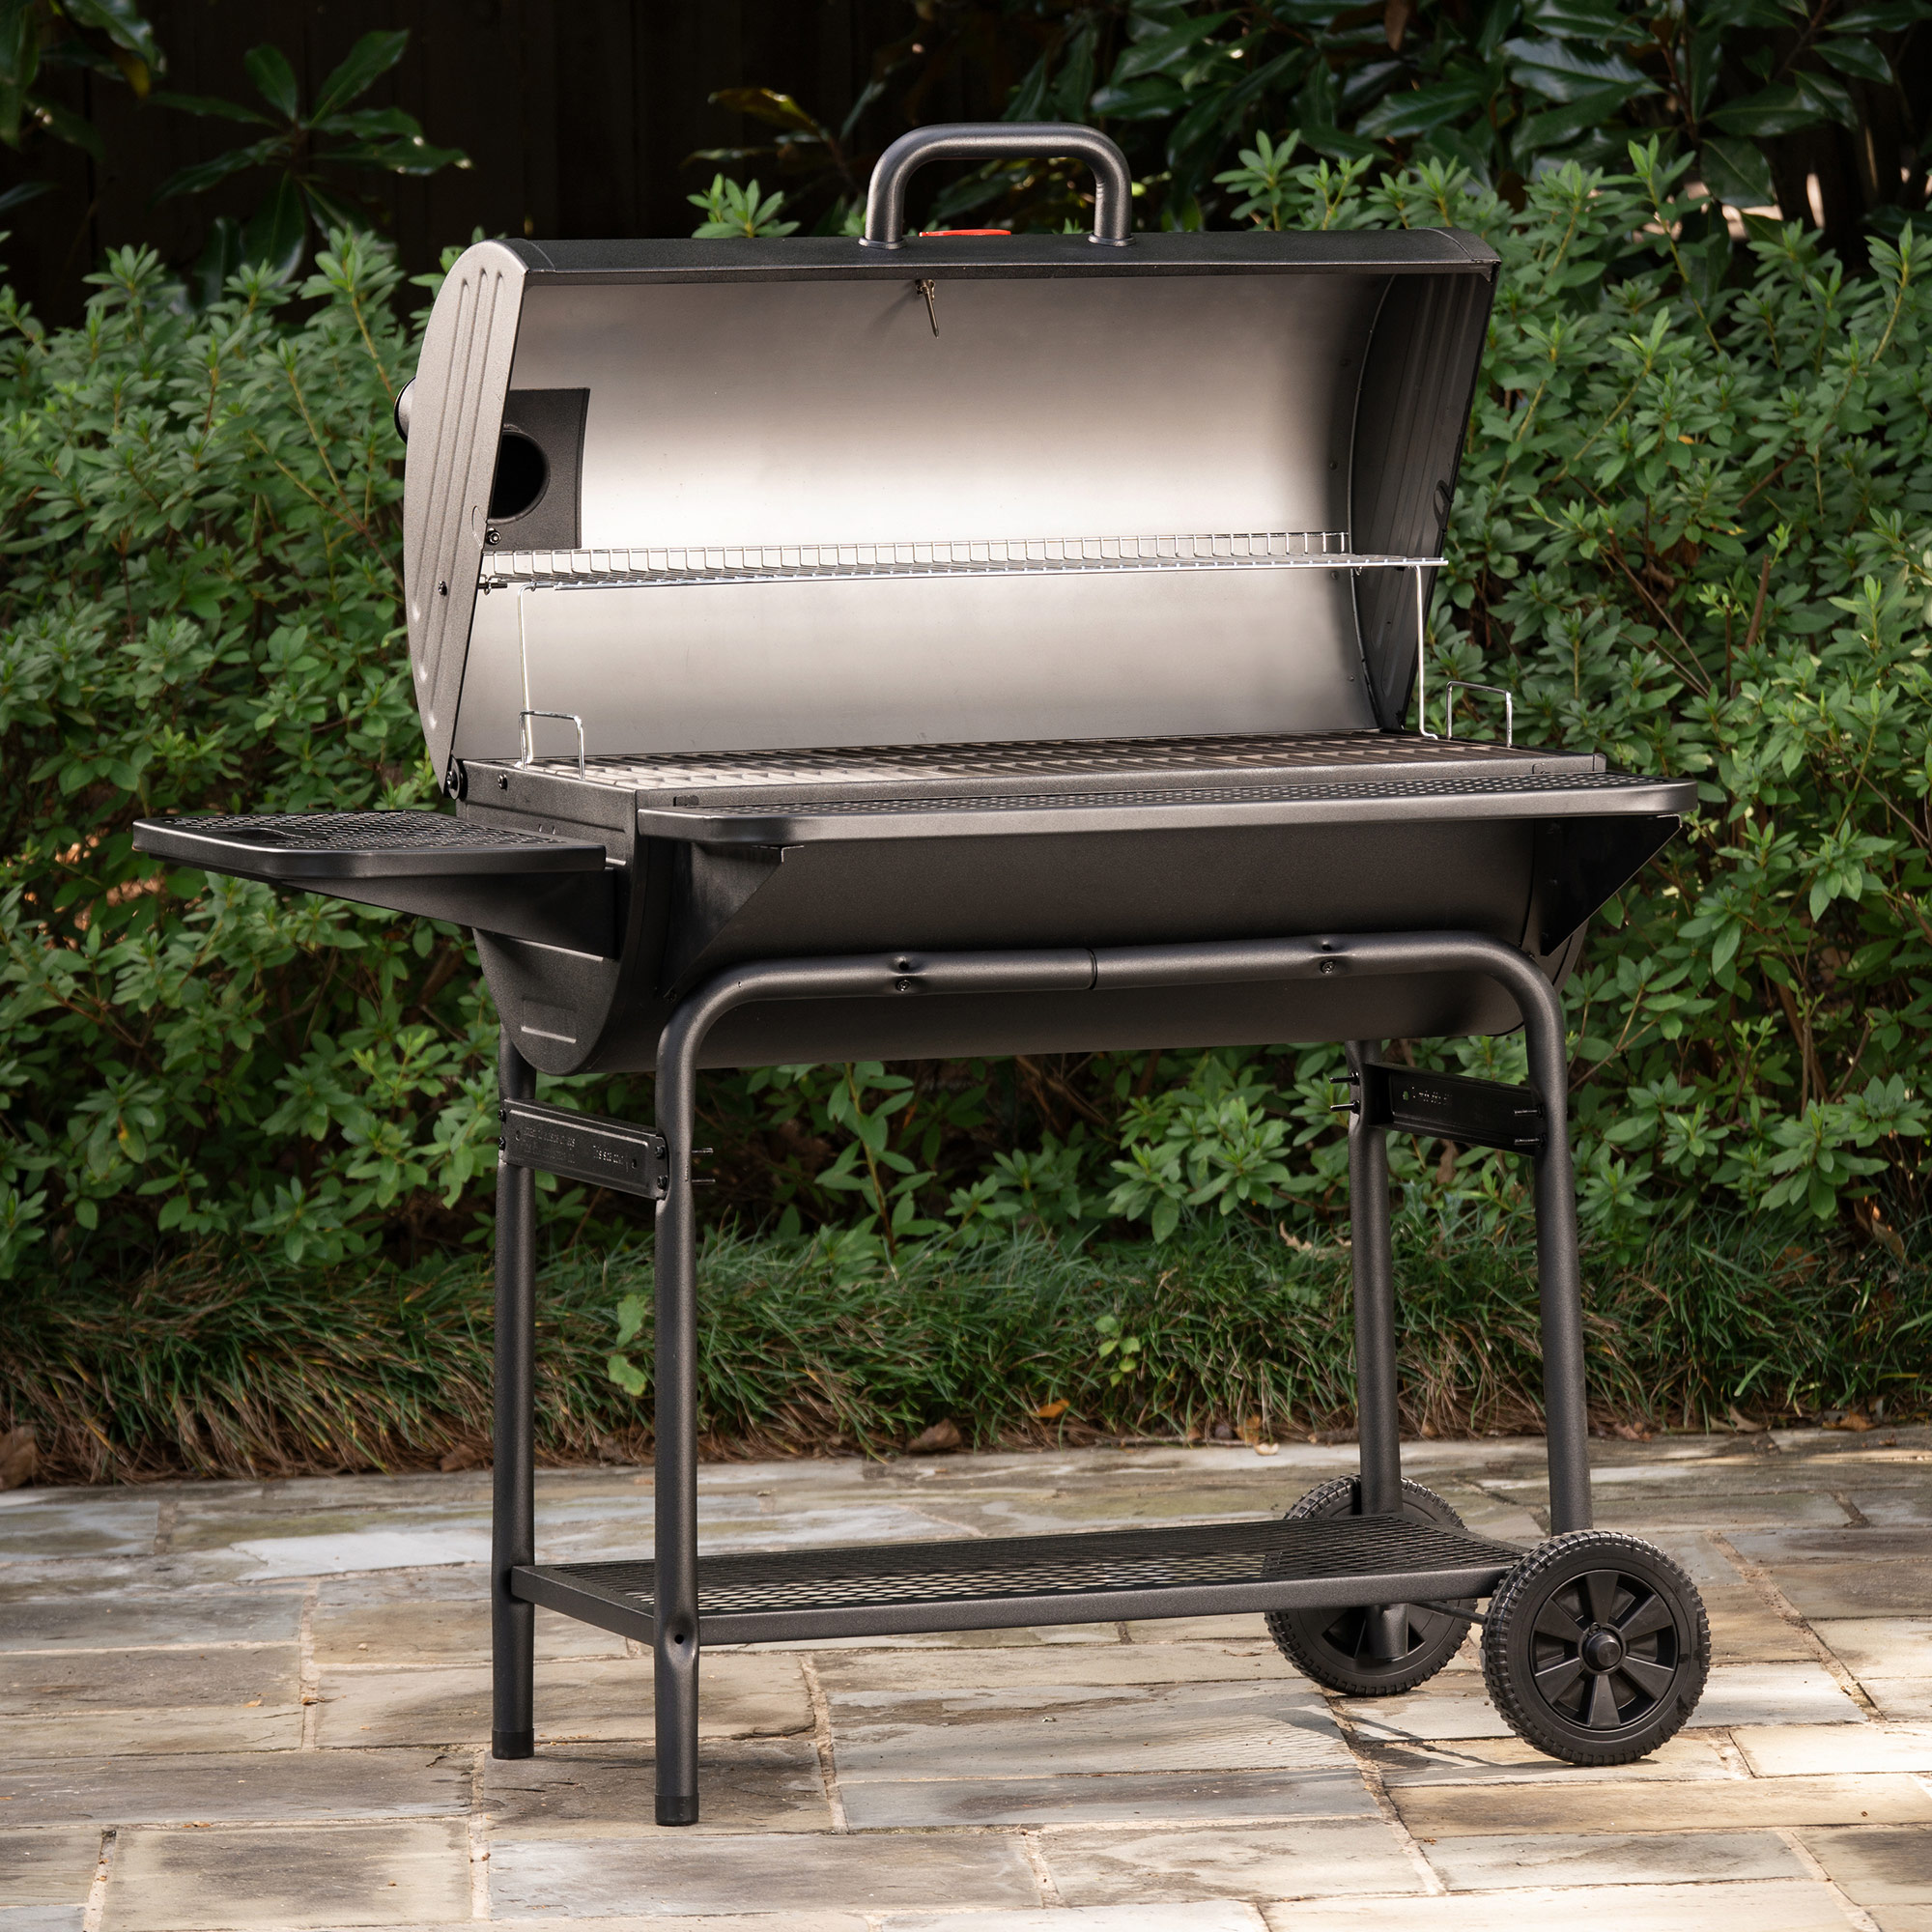 Char-Griller Pro Deluxe XL Charcoal Barrel Grill - image 3 of 8